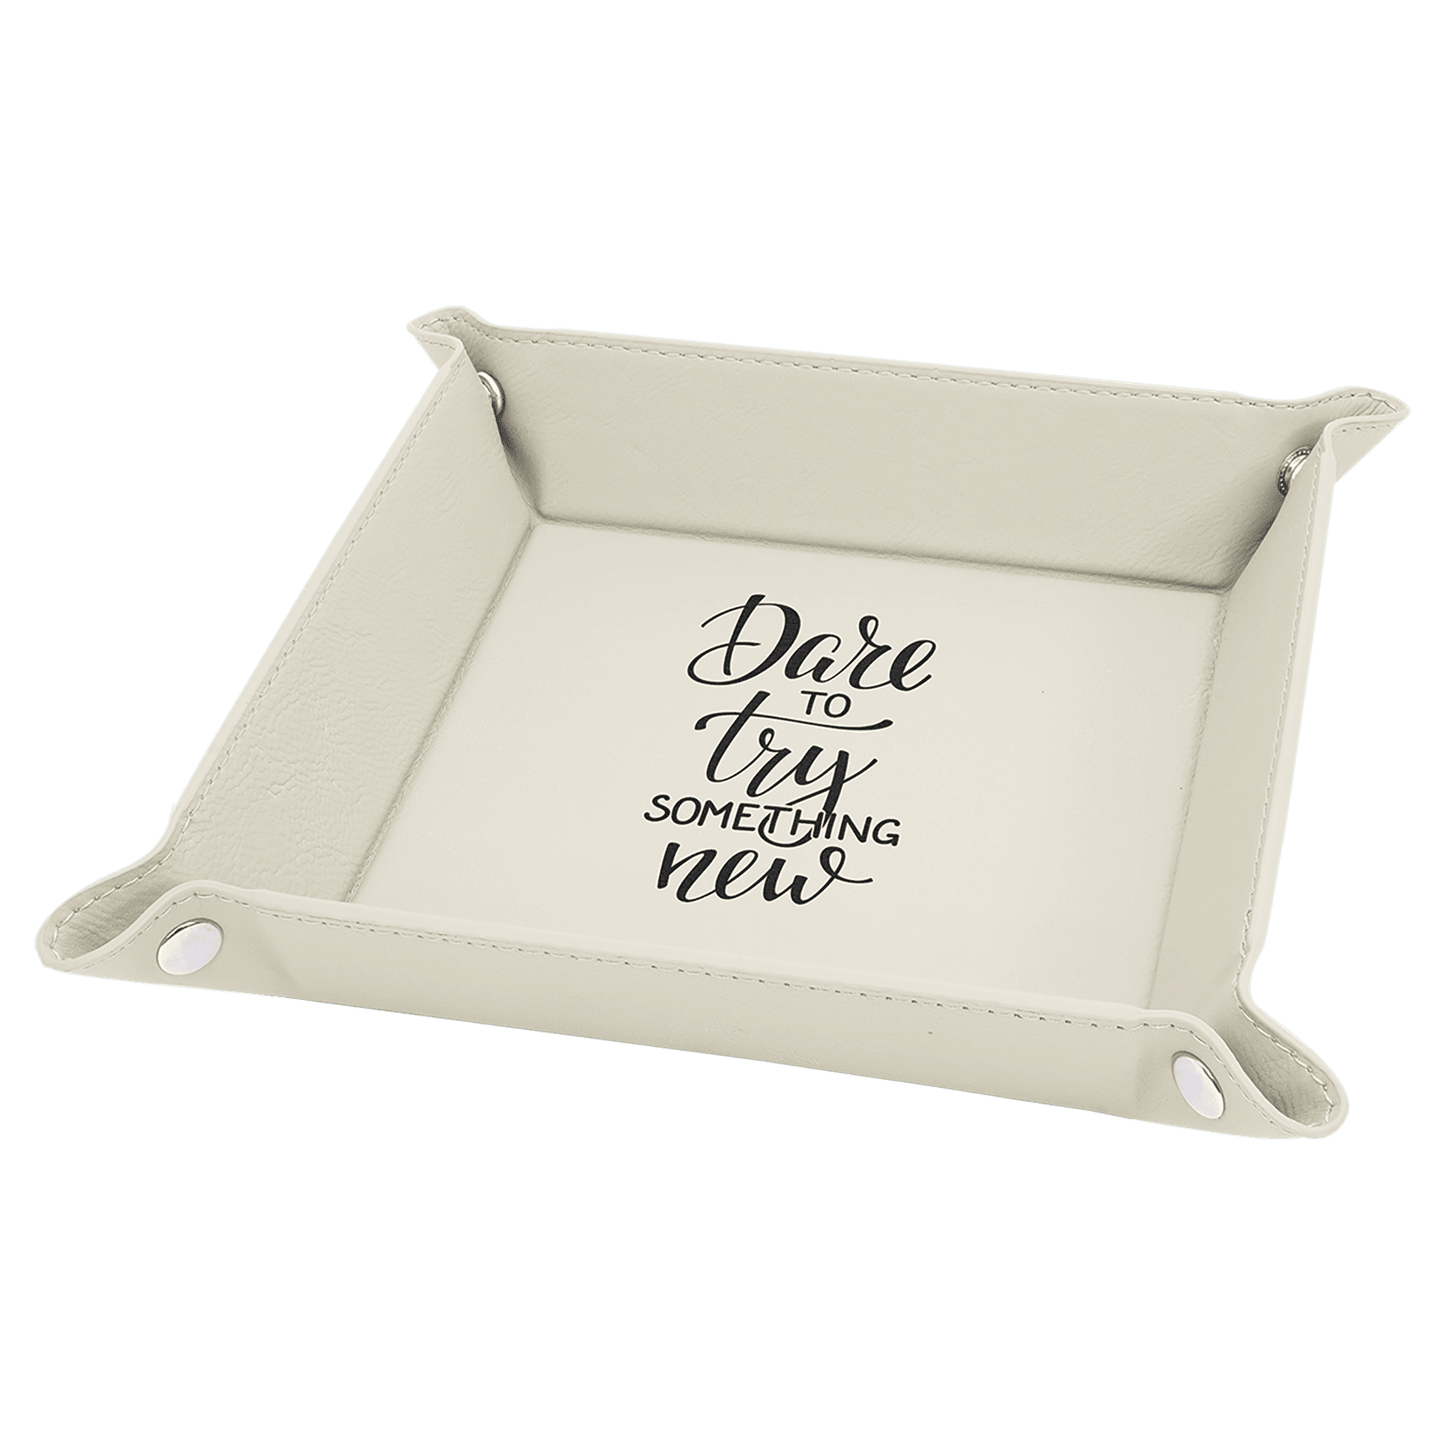 6" x 6" White Laserable Leatherette Snap Up Tray with Silver Snaps